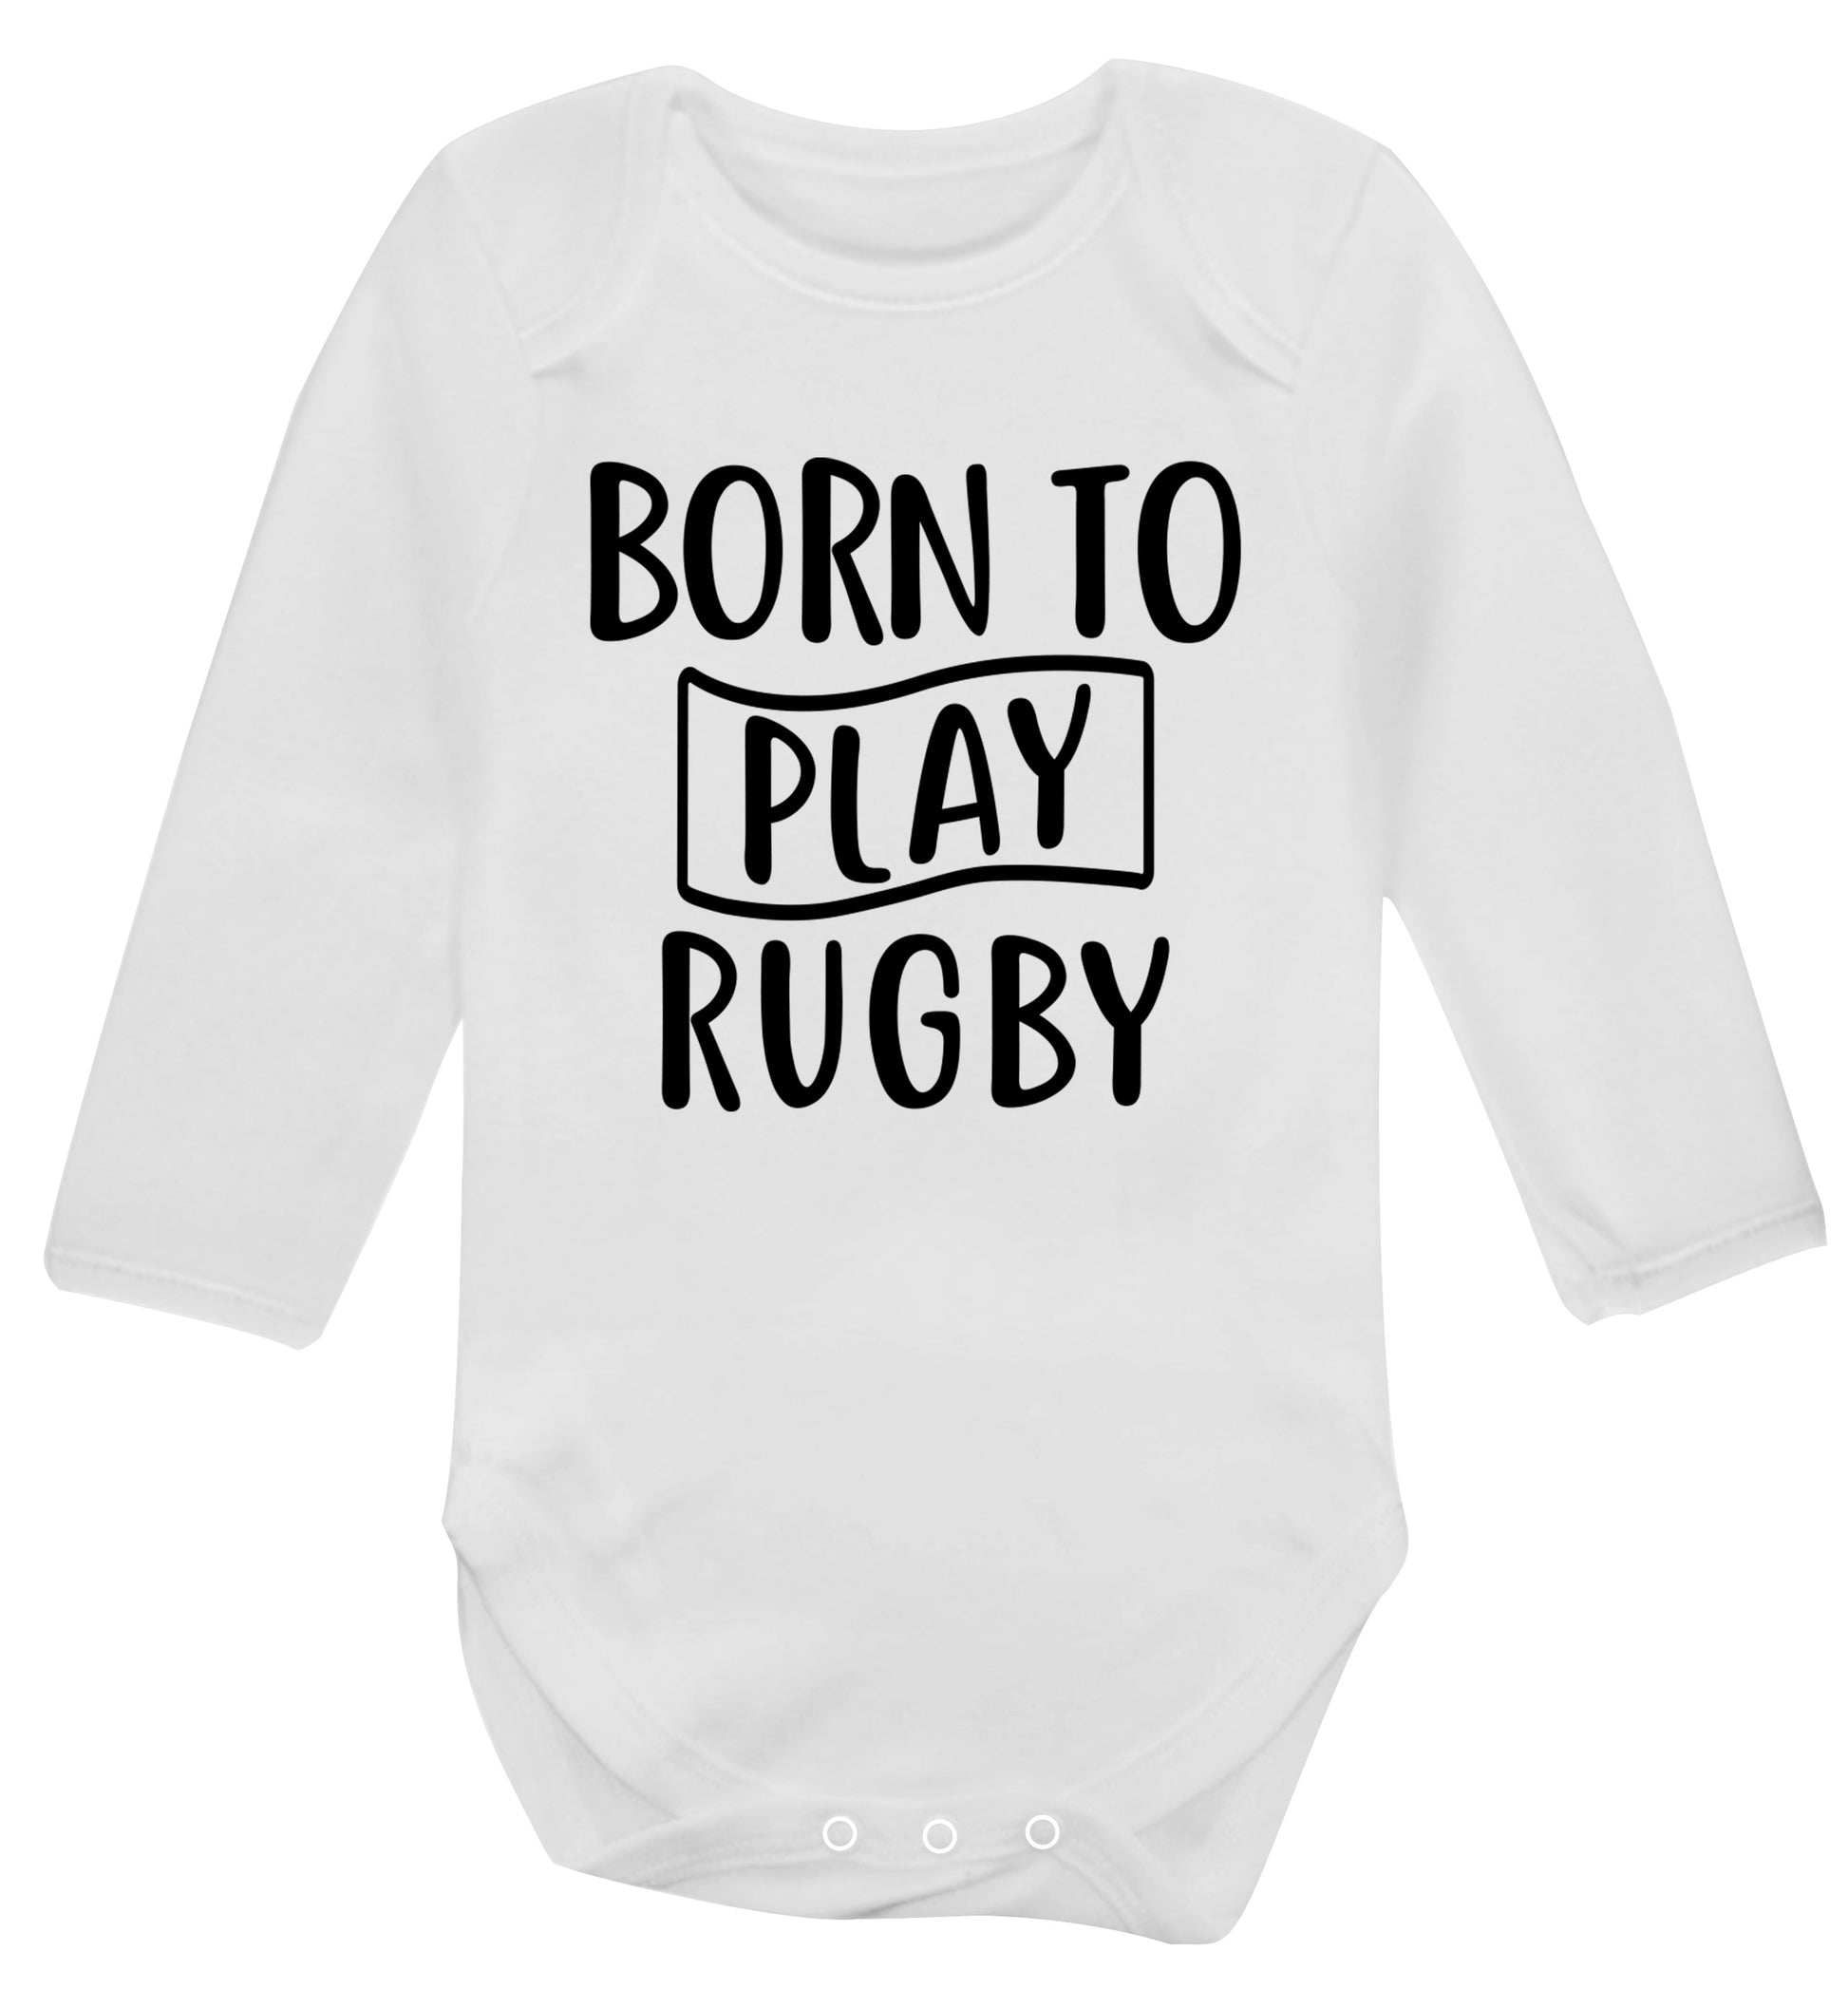 Born to play rugby Baby Vest long sleeved white 6-12 months